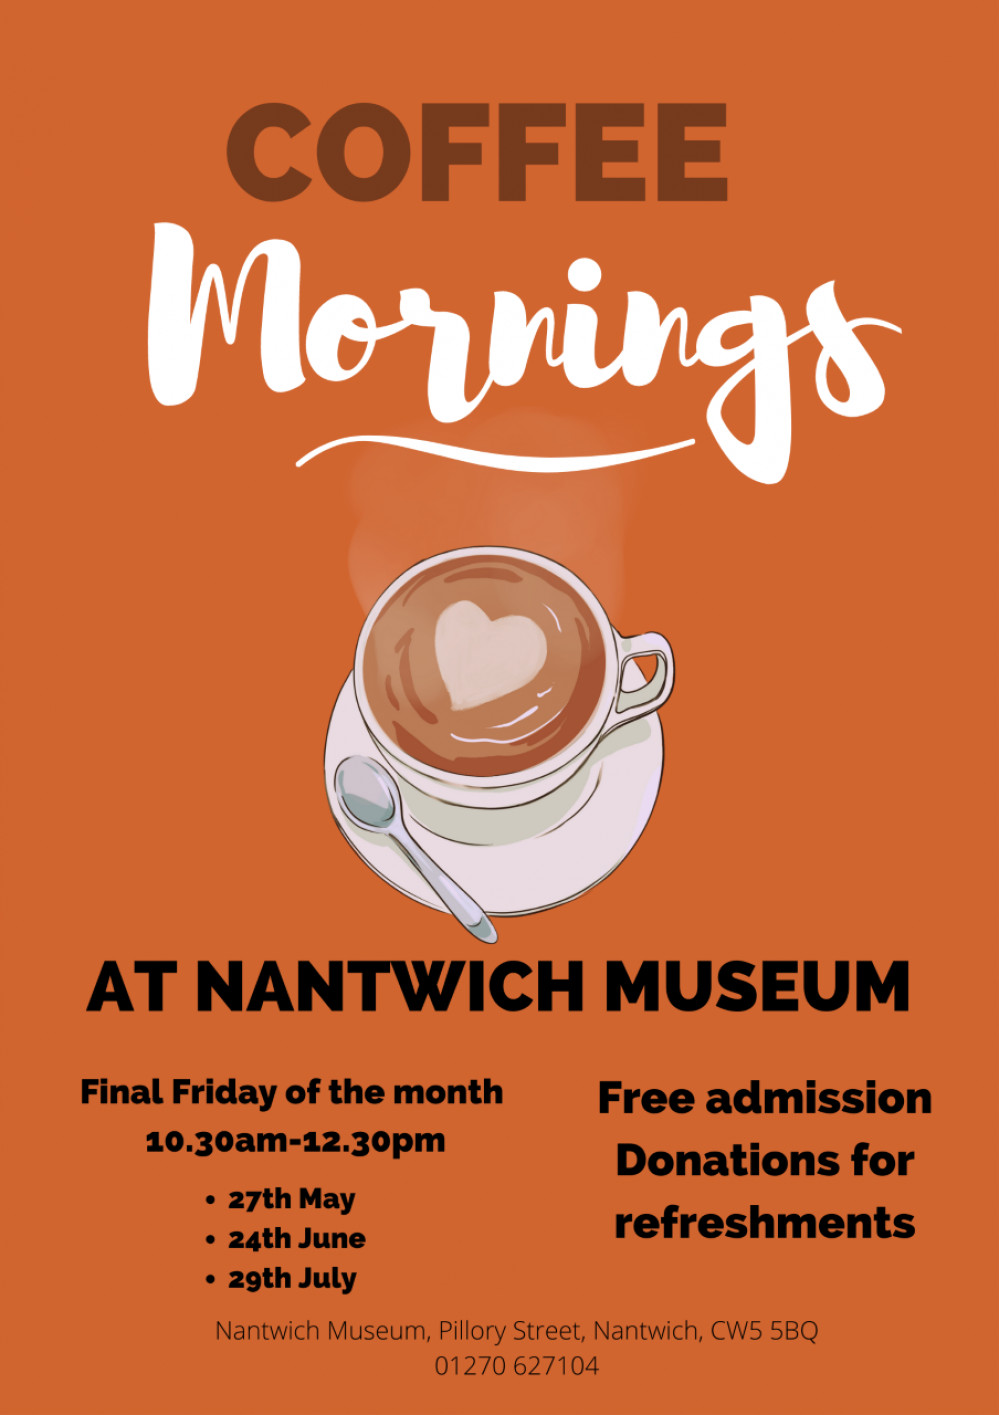 Coffee Morning at Nantwich Museum. 